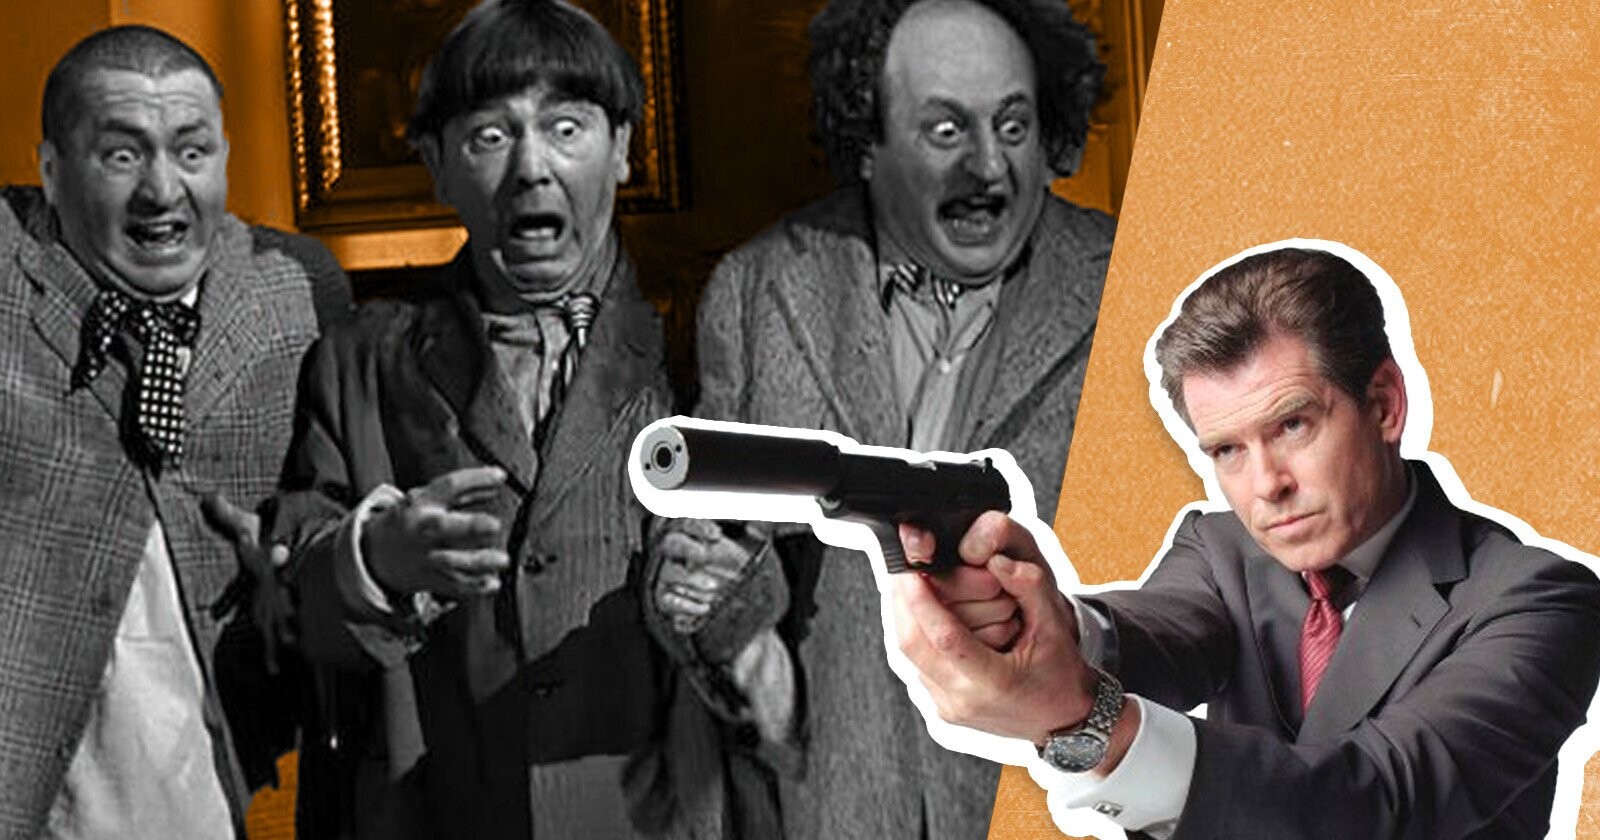 Did the Mastermind of the James Bond Cinematic Universe Really Kill the Creator of the Three Stooges?